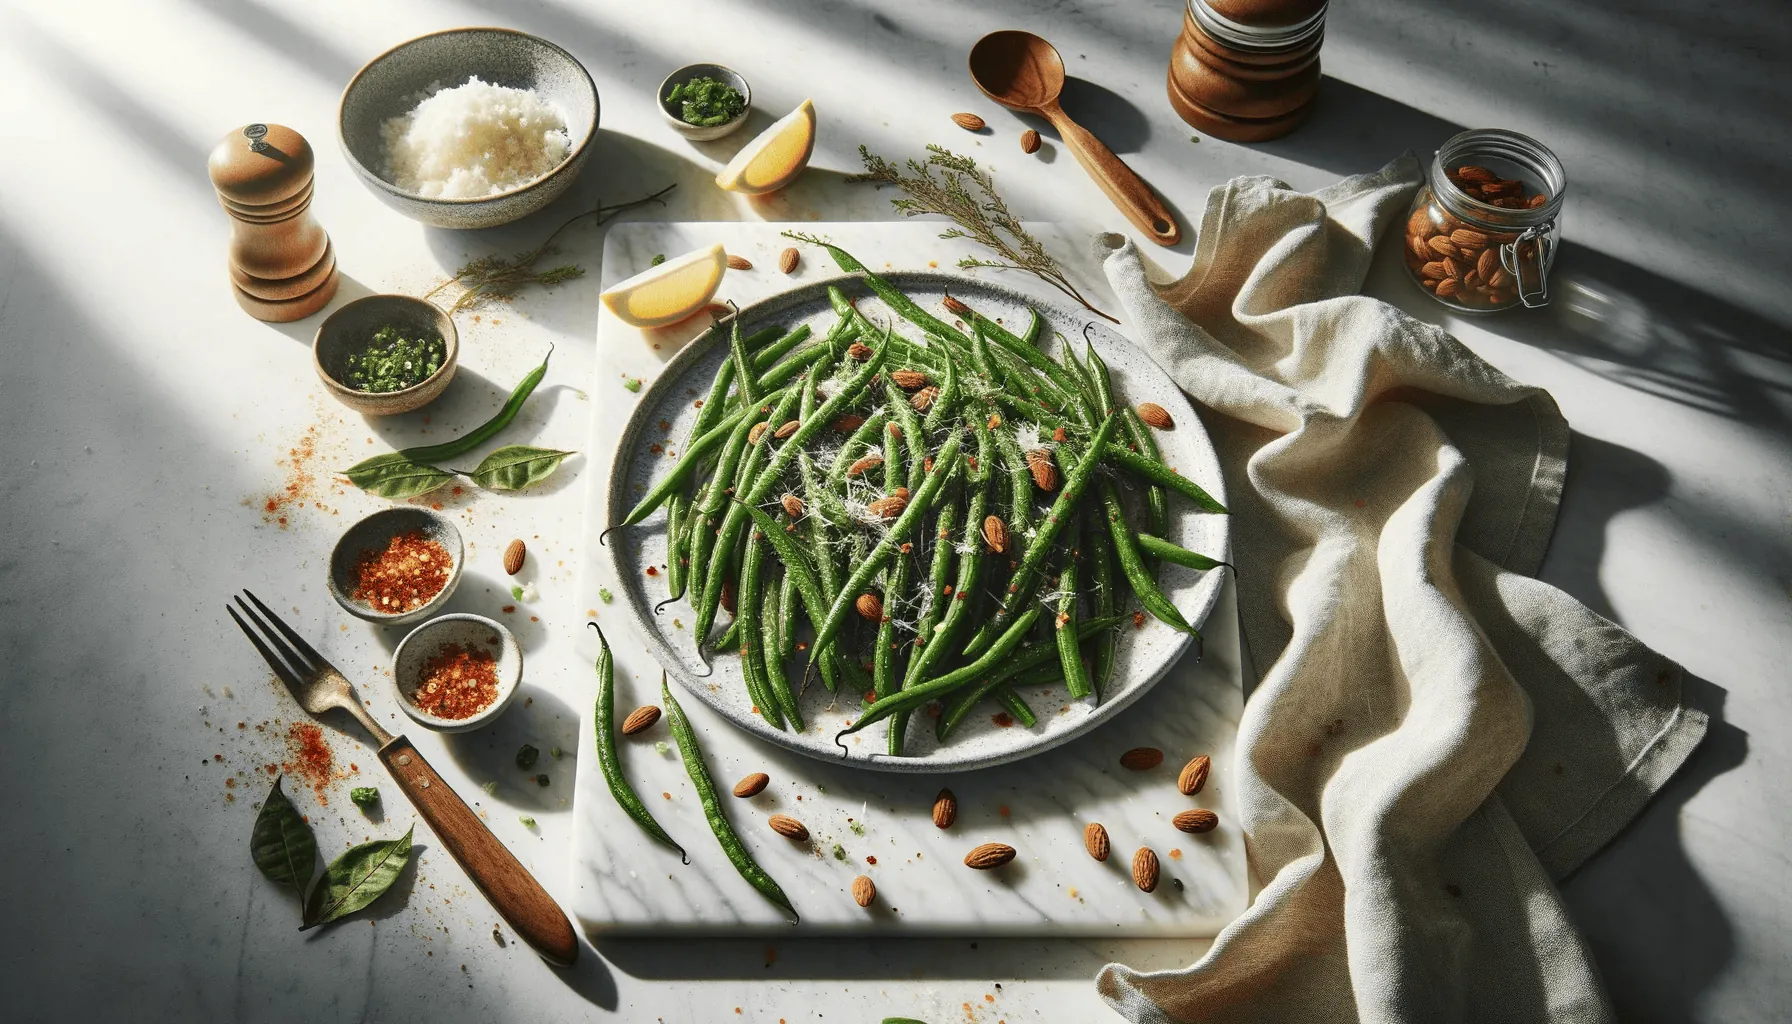 Roasted green beans, ready to serve